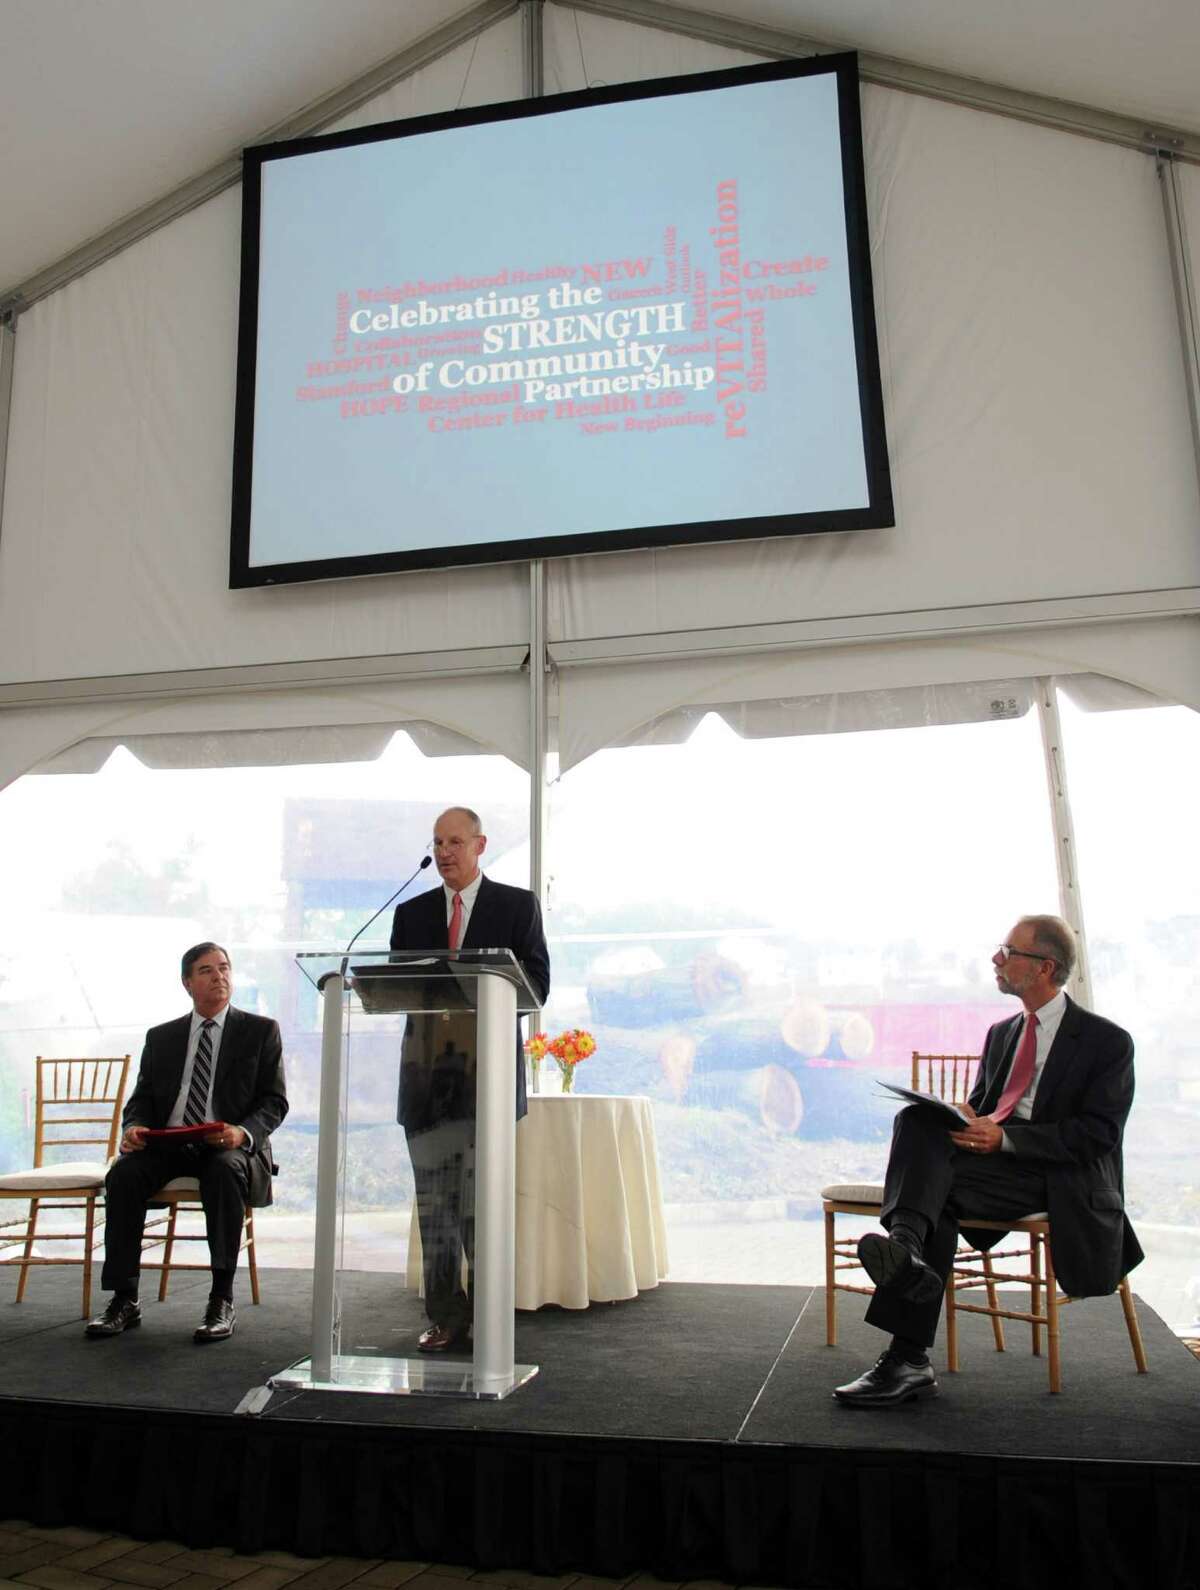 Brian Grissler, President and CEO of Stamford Hospital, speaks during a ceremony to discuss a collaborative effort between Stamford Hospital and Charter Oak Communities to revitalize the west side at Stamford Hospital on Thursday, October 4, 2012.